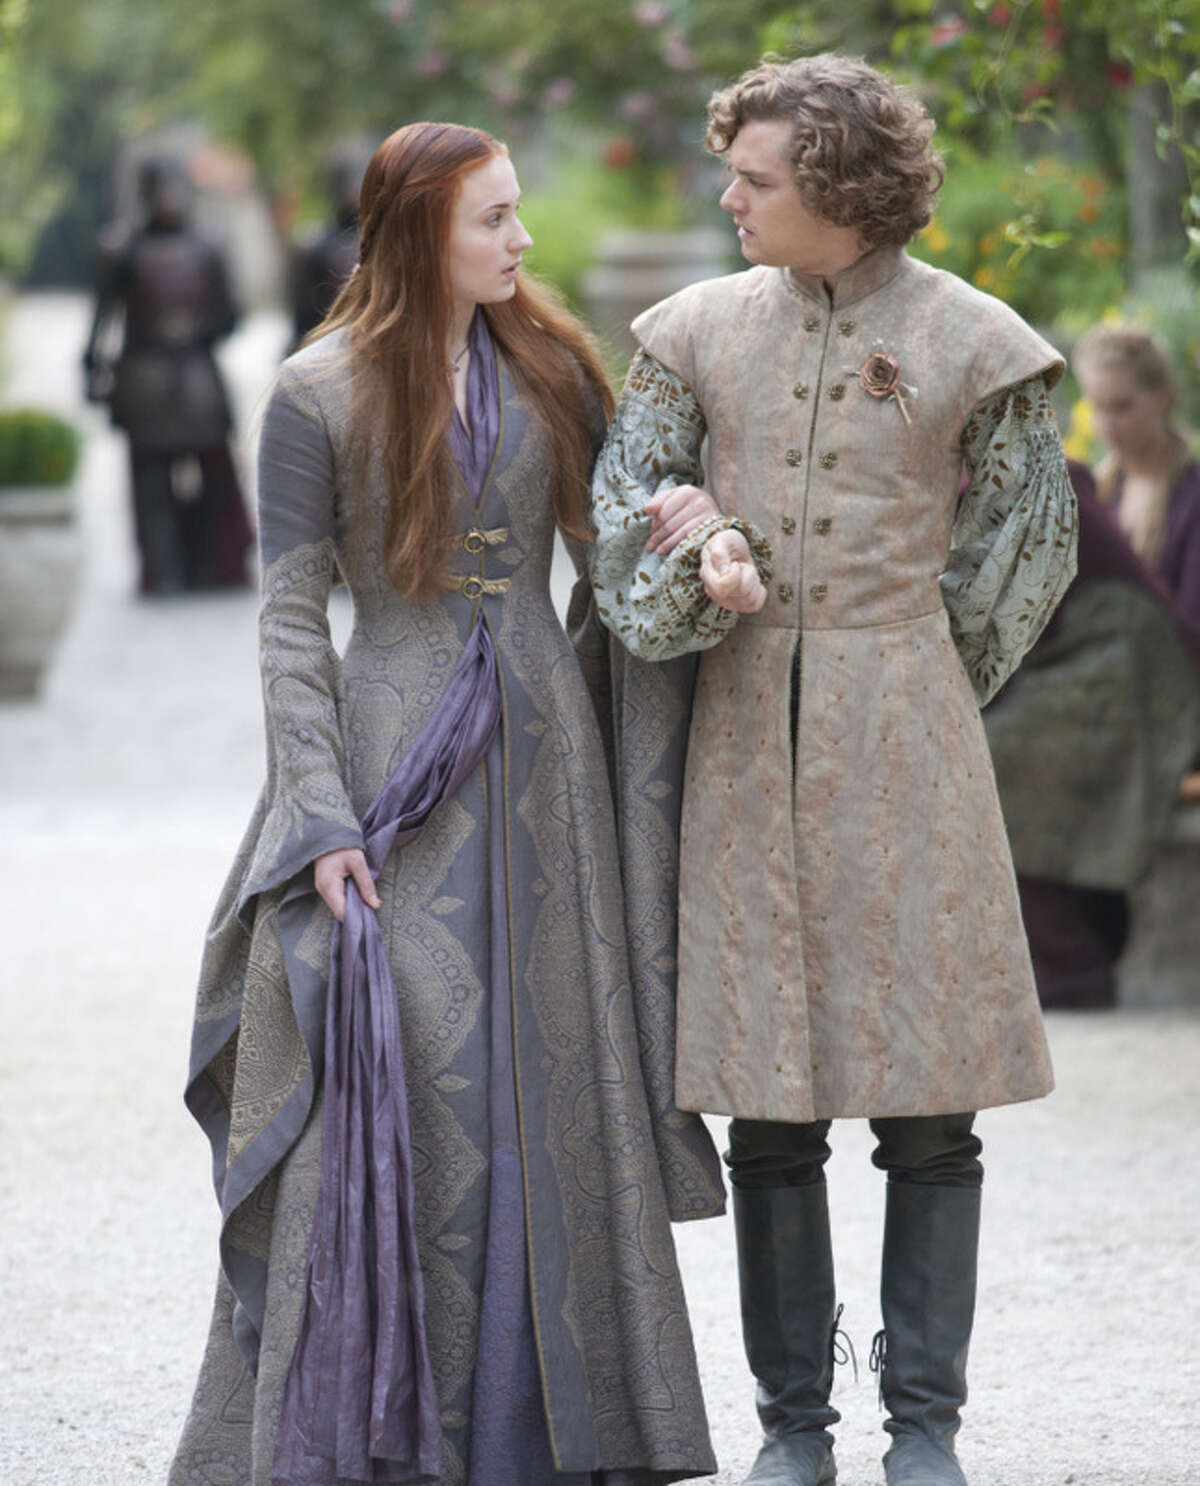 Sophie Turner as Sansa Stark and Finn Jones as Loras Tyrell walk together during shooting of "Game of Thrones." >>Keep clicking to see ten things we learned during last year's Comicpalooza.